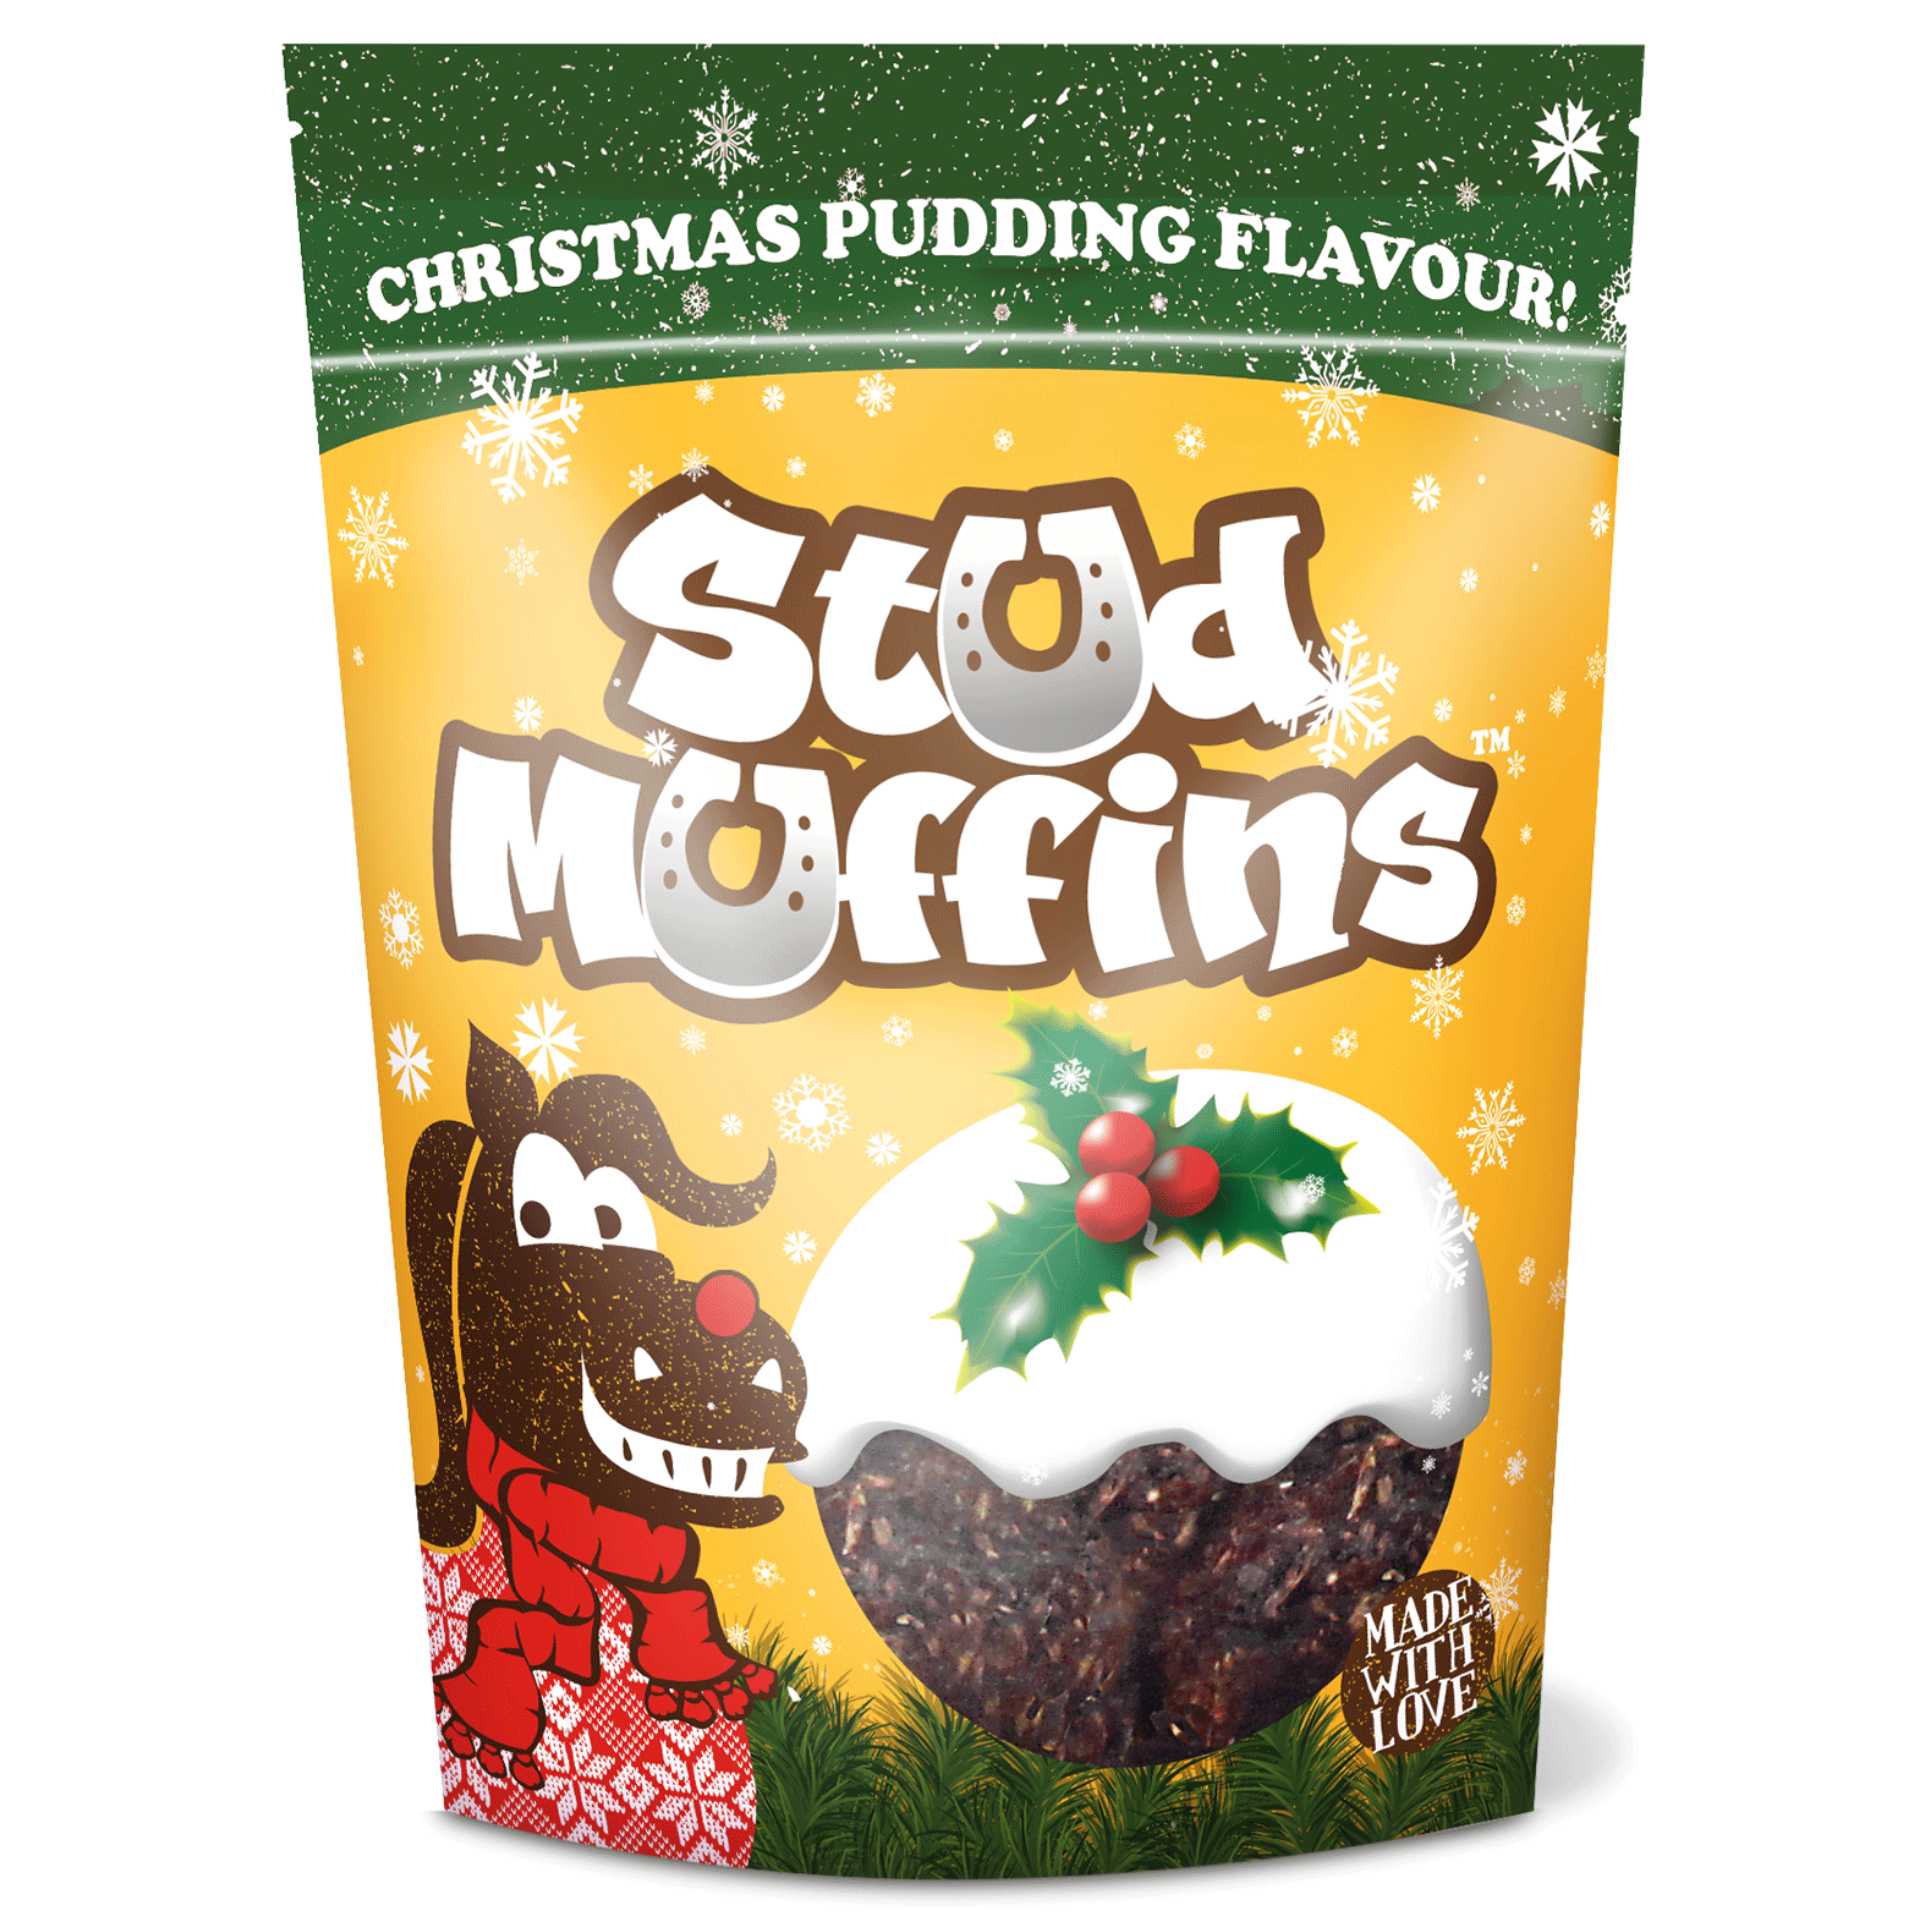 Stud Muffins Christmas Pudding flavour 15 Stk.